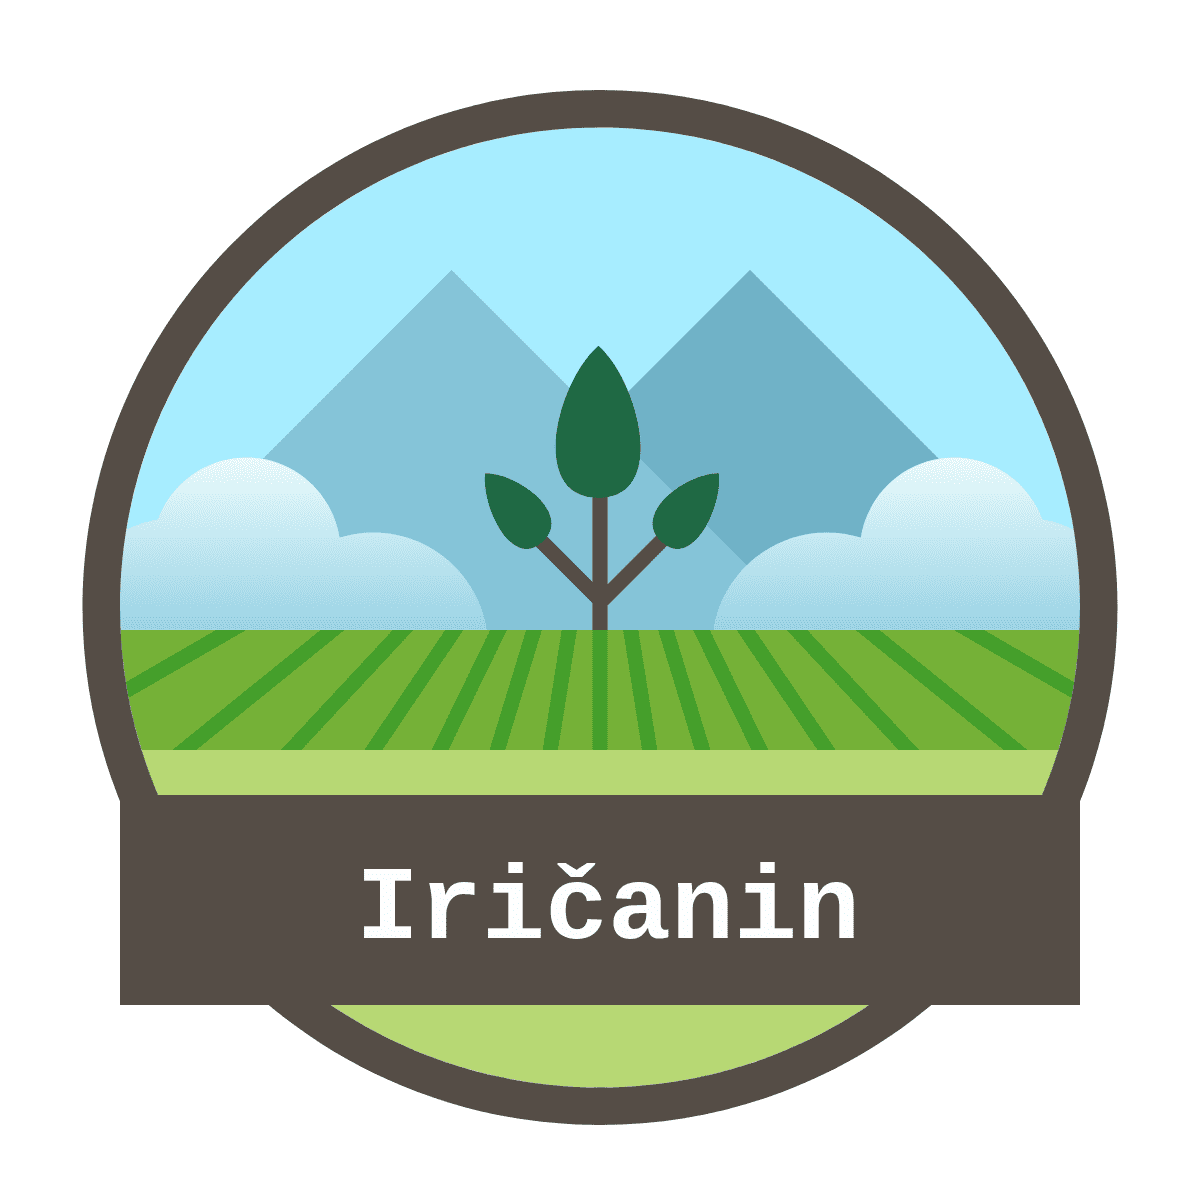 Agricultural holding Irichanin